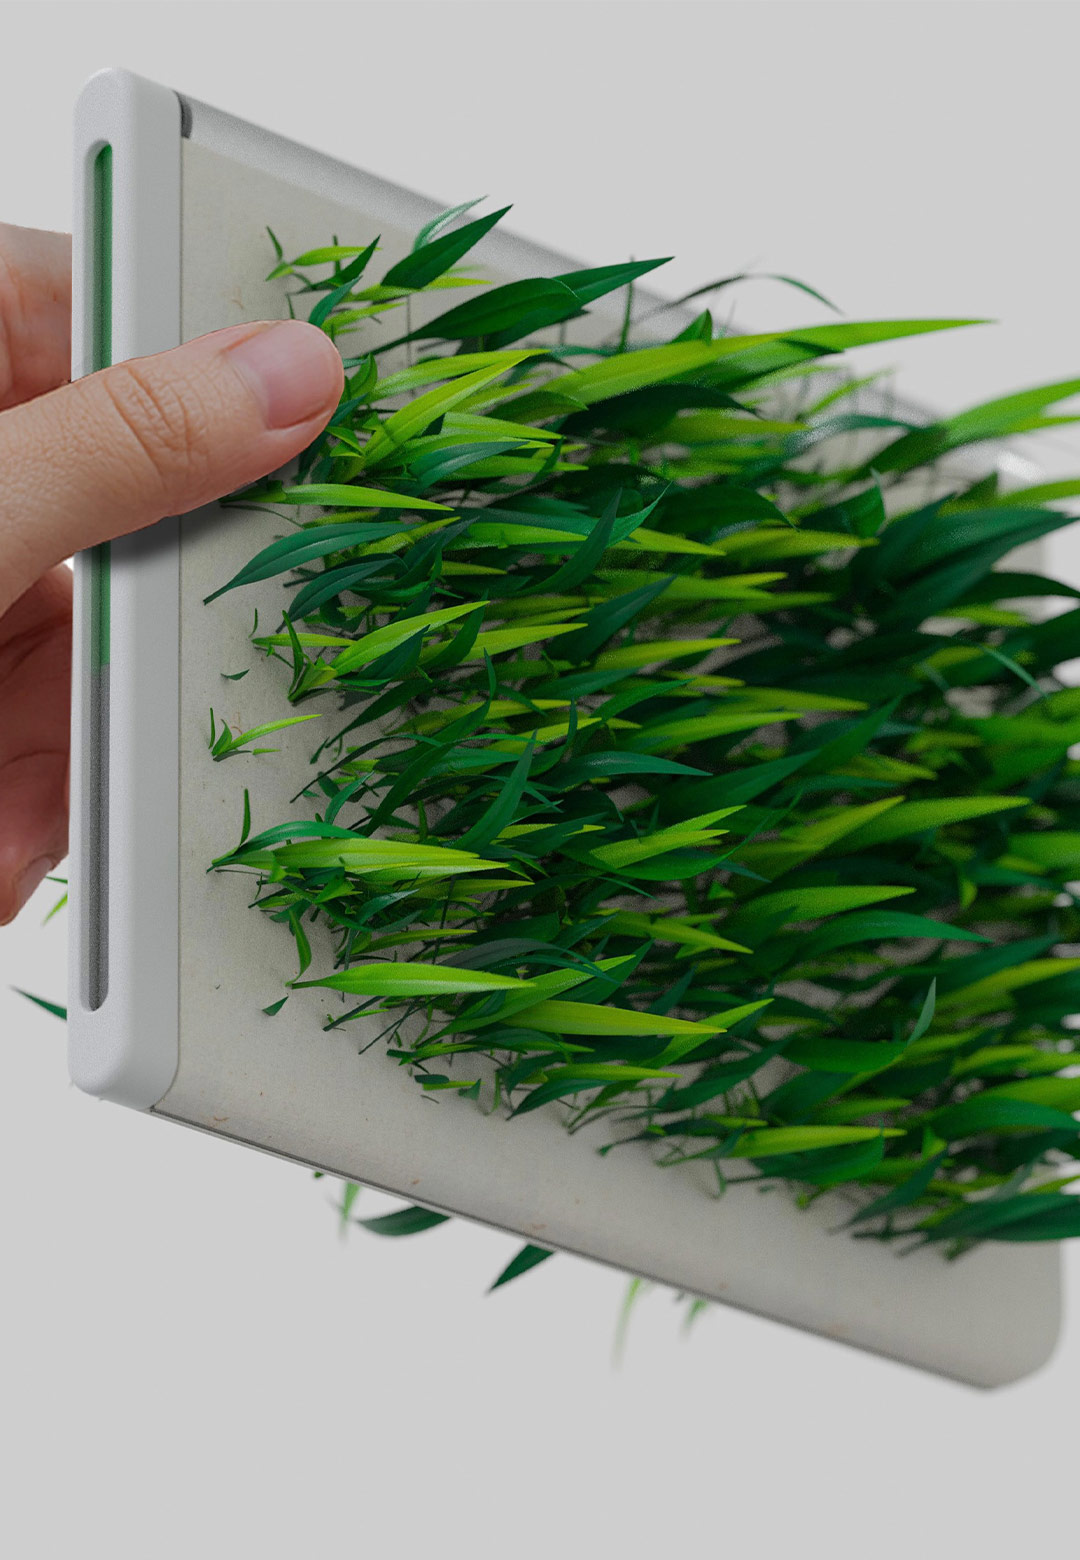 ‘Square Greens’ by SEVE makes growing food in kitchens sustainable and effortless